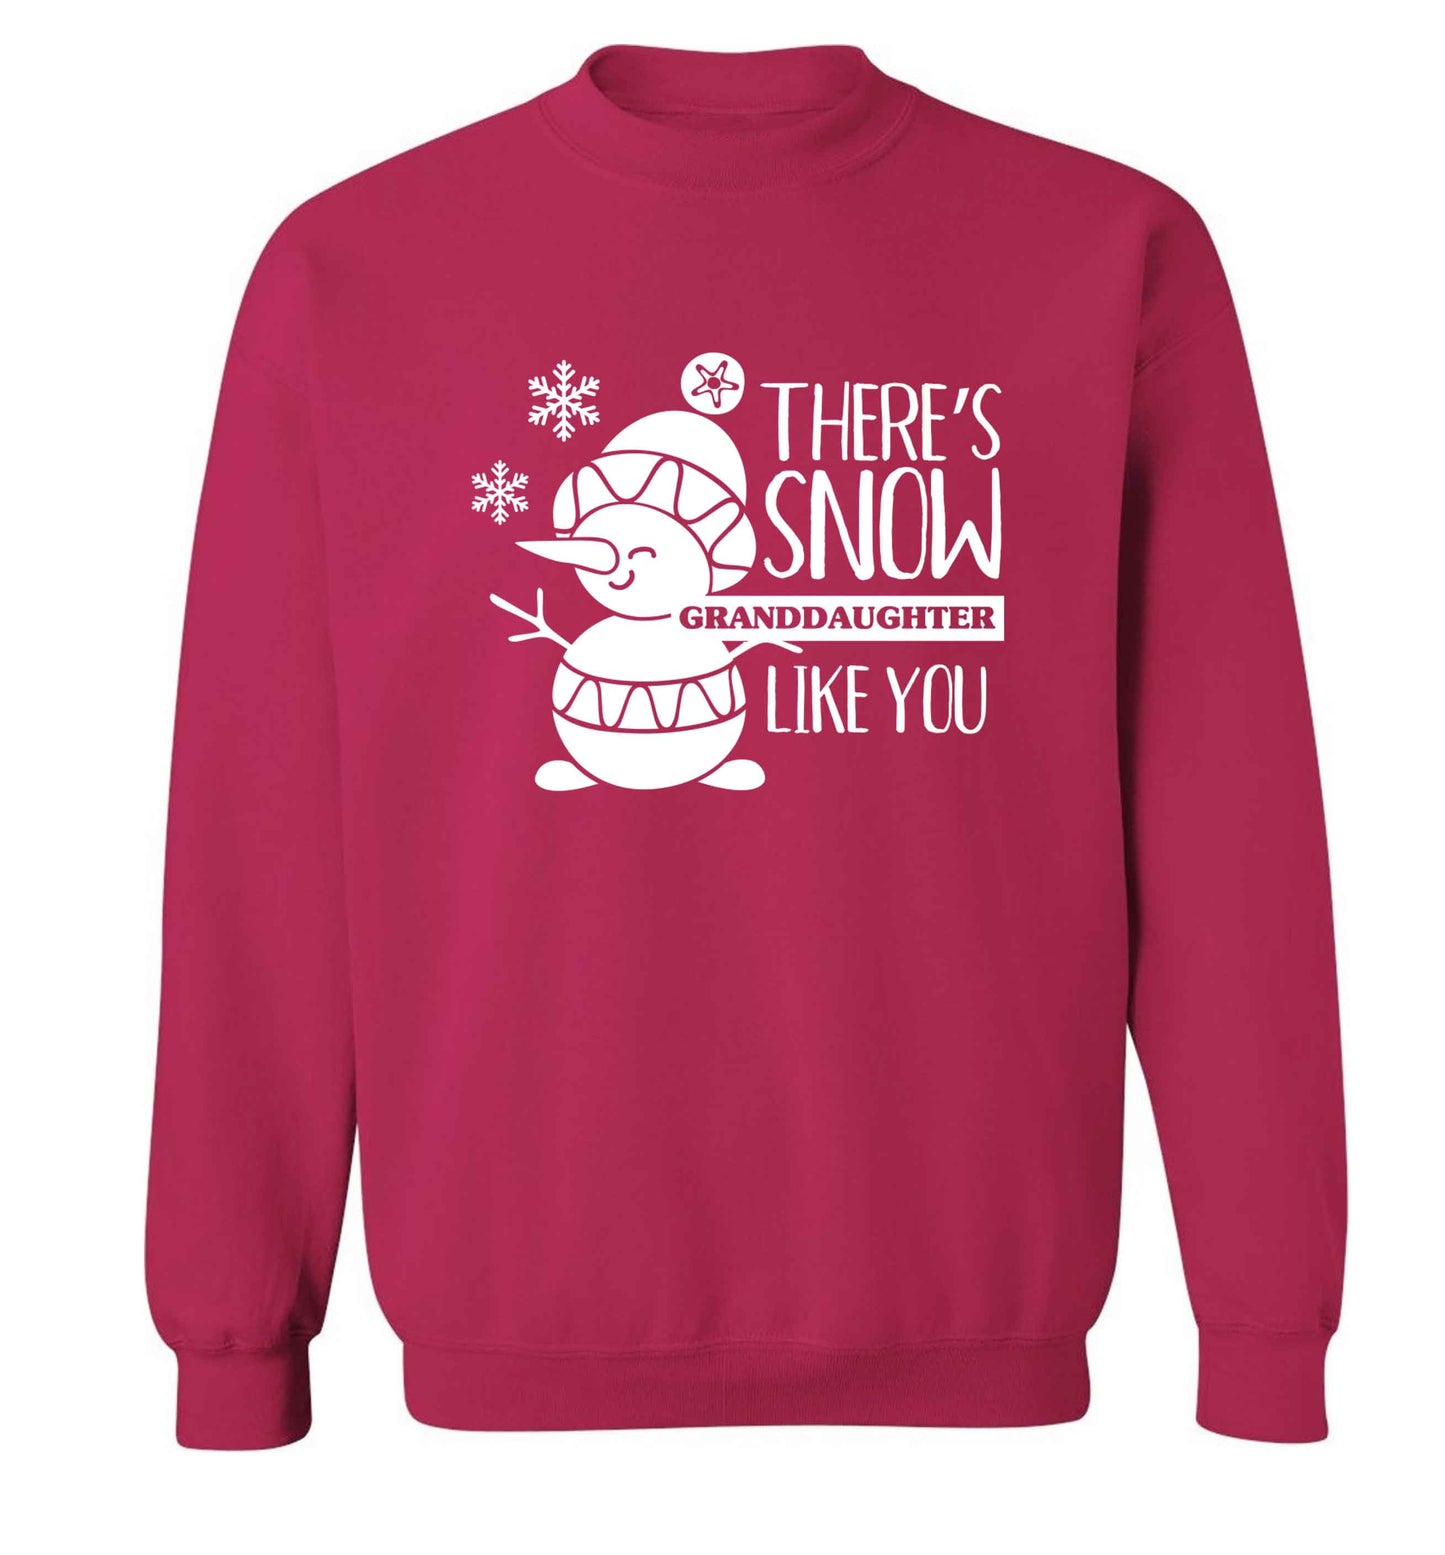 There's snow granddaughter like you adult's unisex pink sweater 2XL